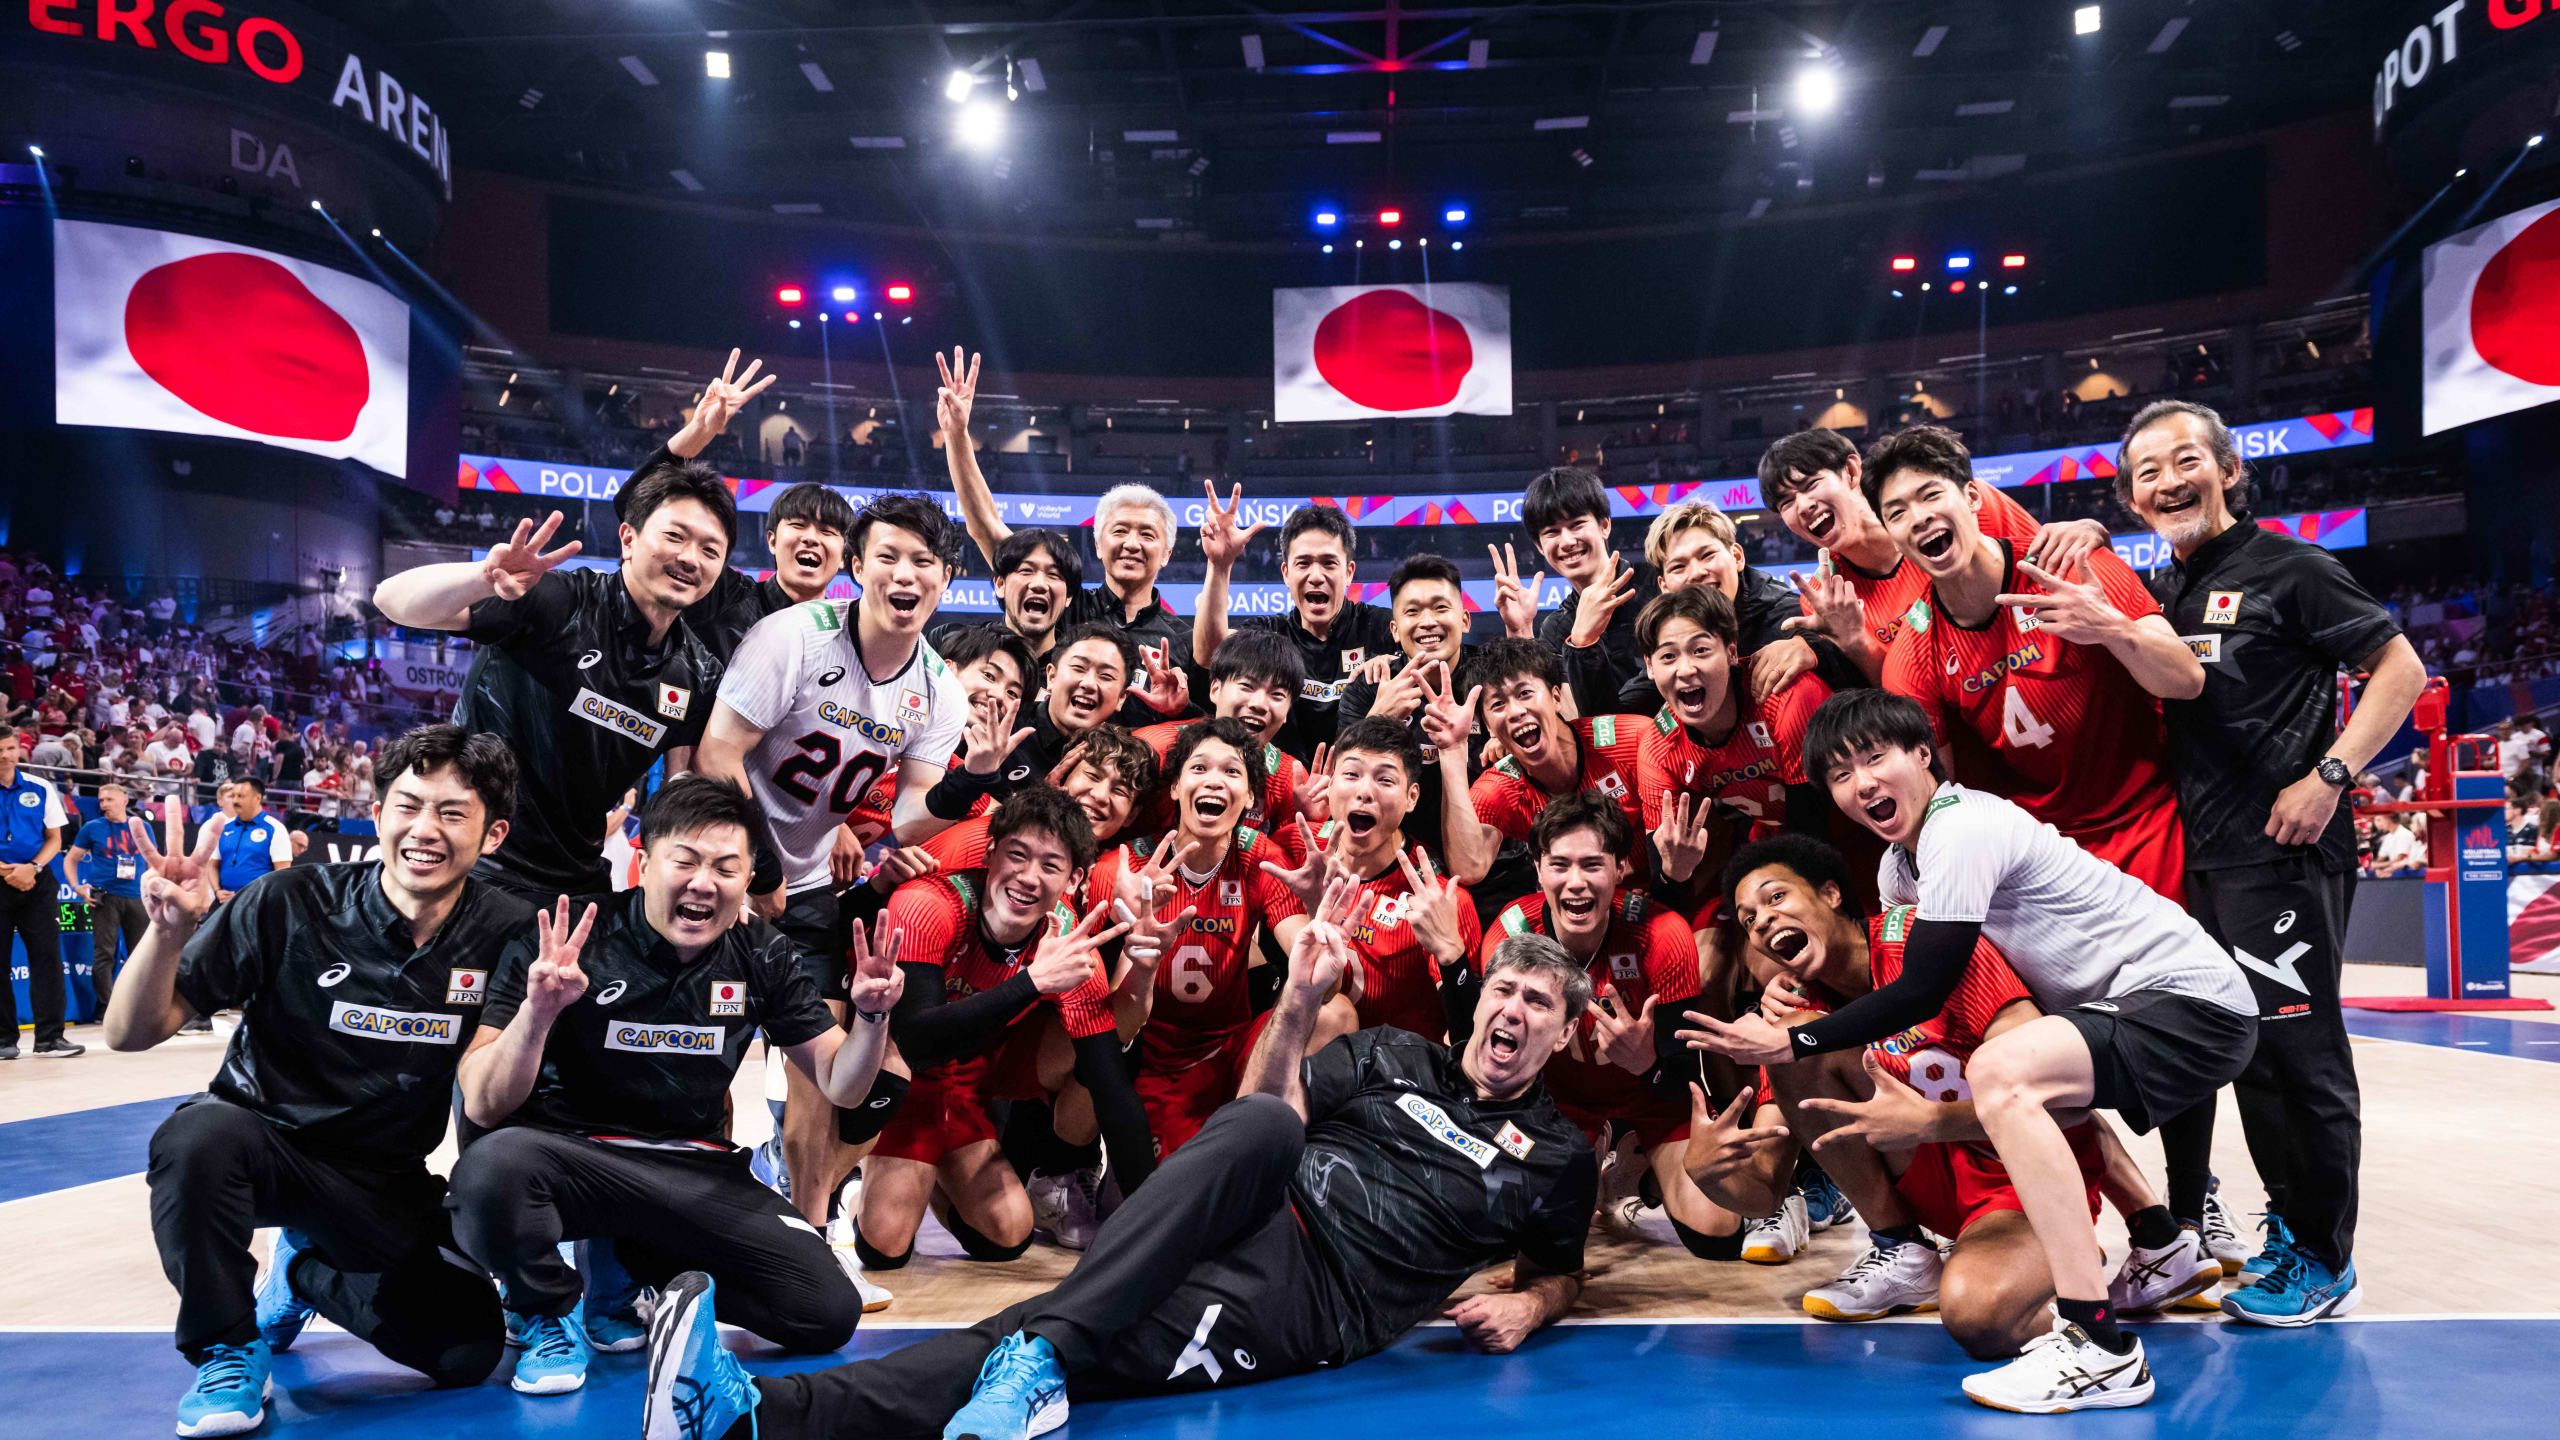 JAPAN BEAT WORLD CHAMPIONS ITALY AND MAKE IT TO THE VNL PODIUM Asian